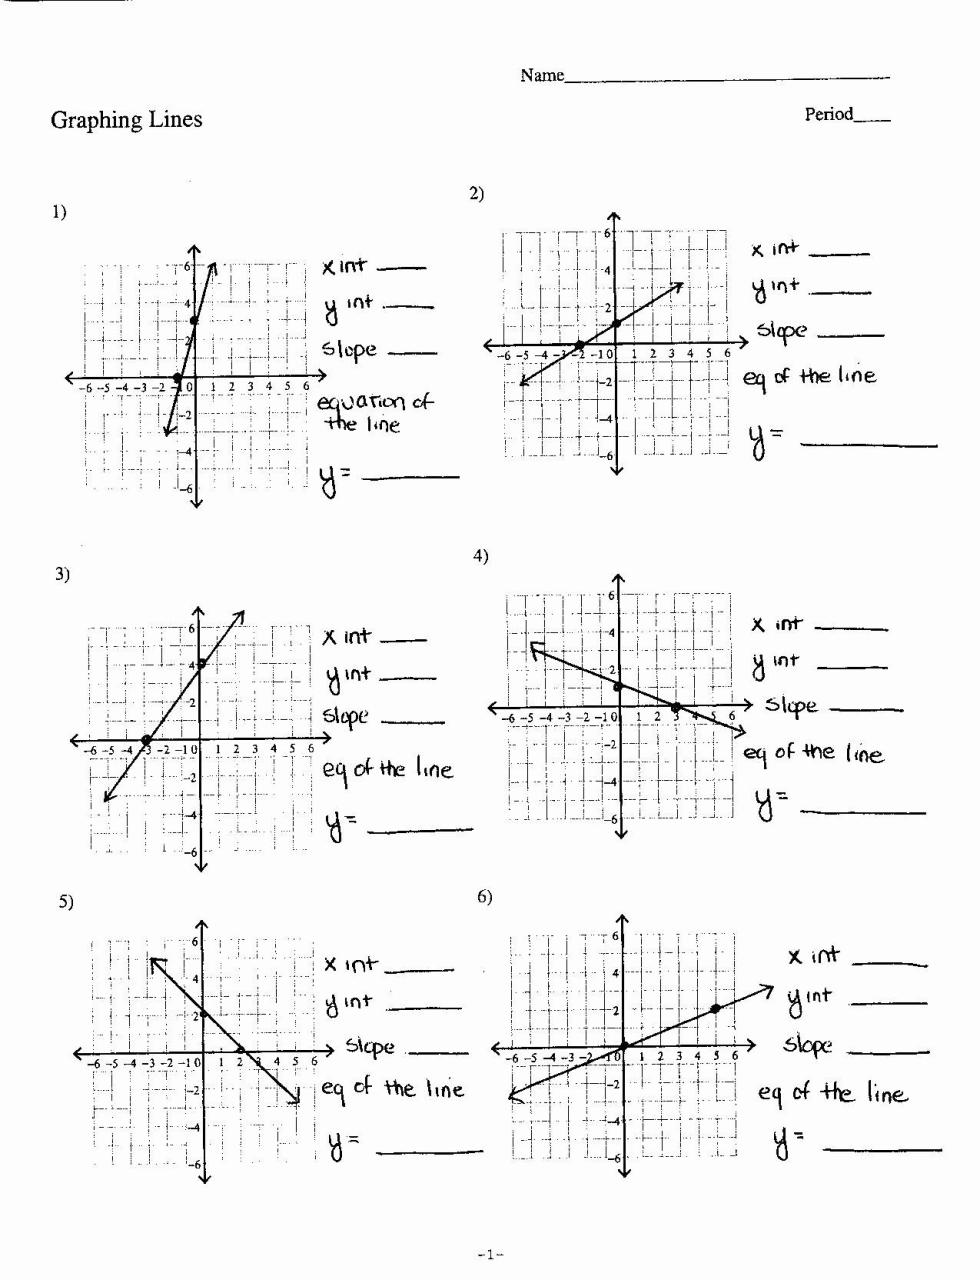 Graphing Linear Inequalities Worksheet Answers Elegant Two Variable